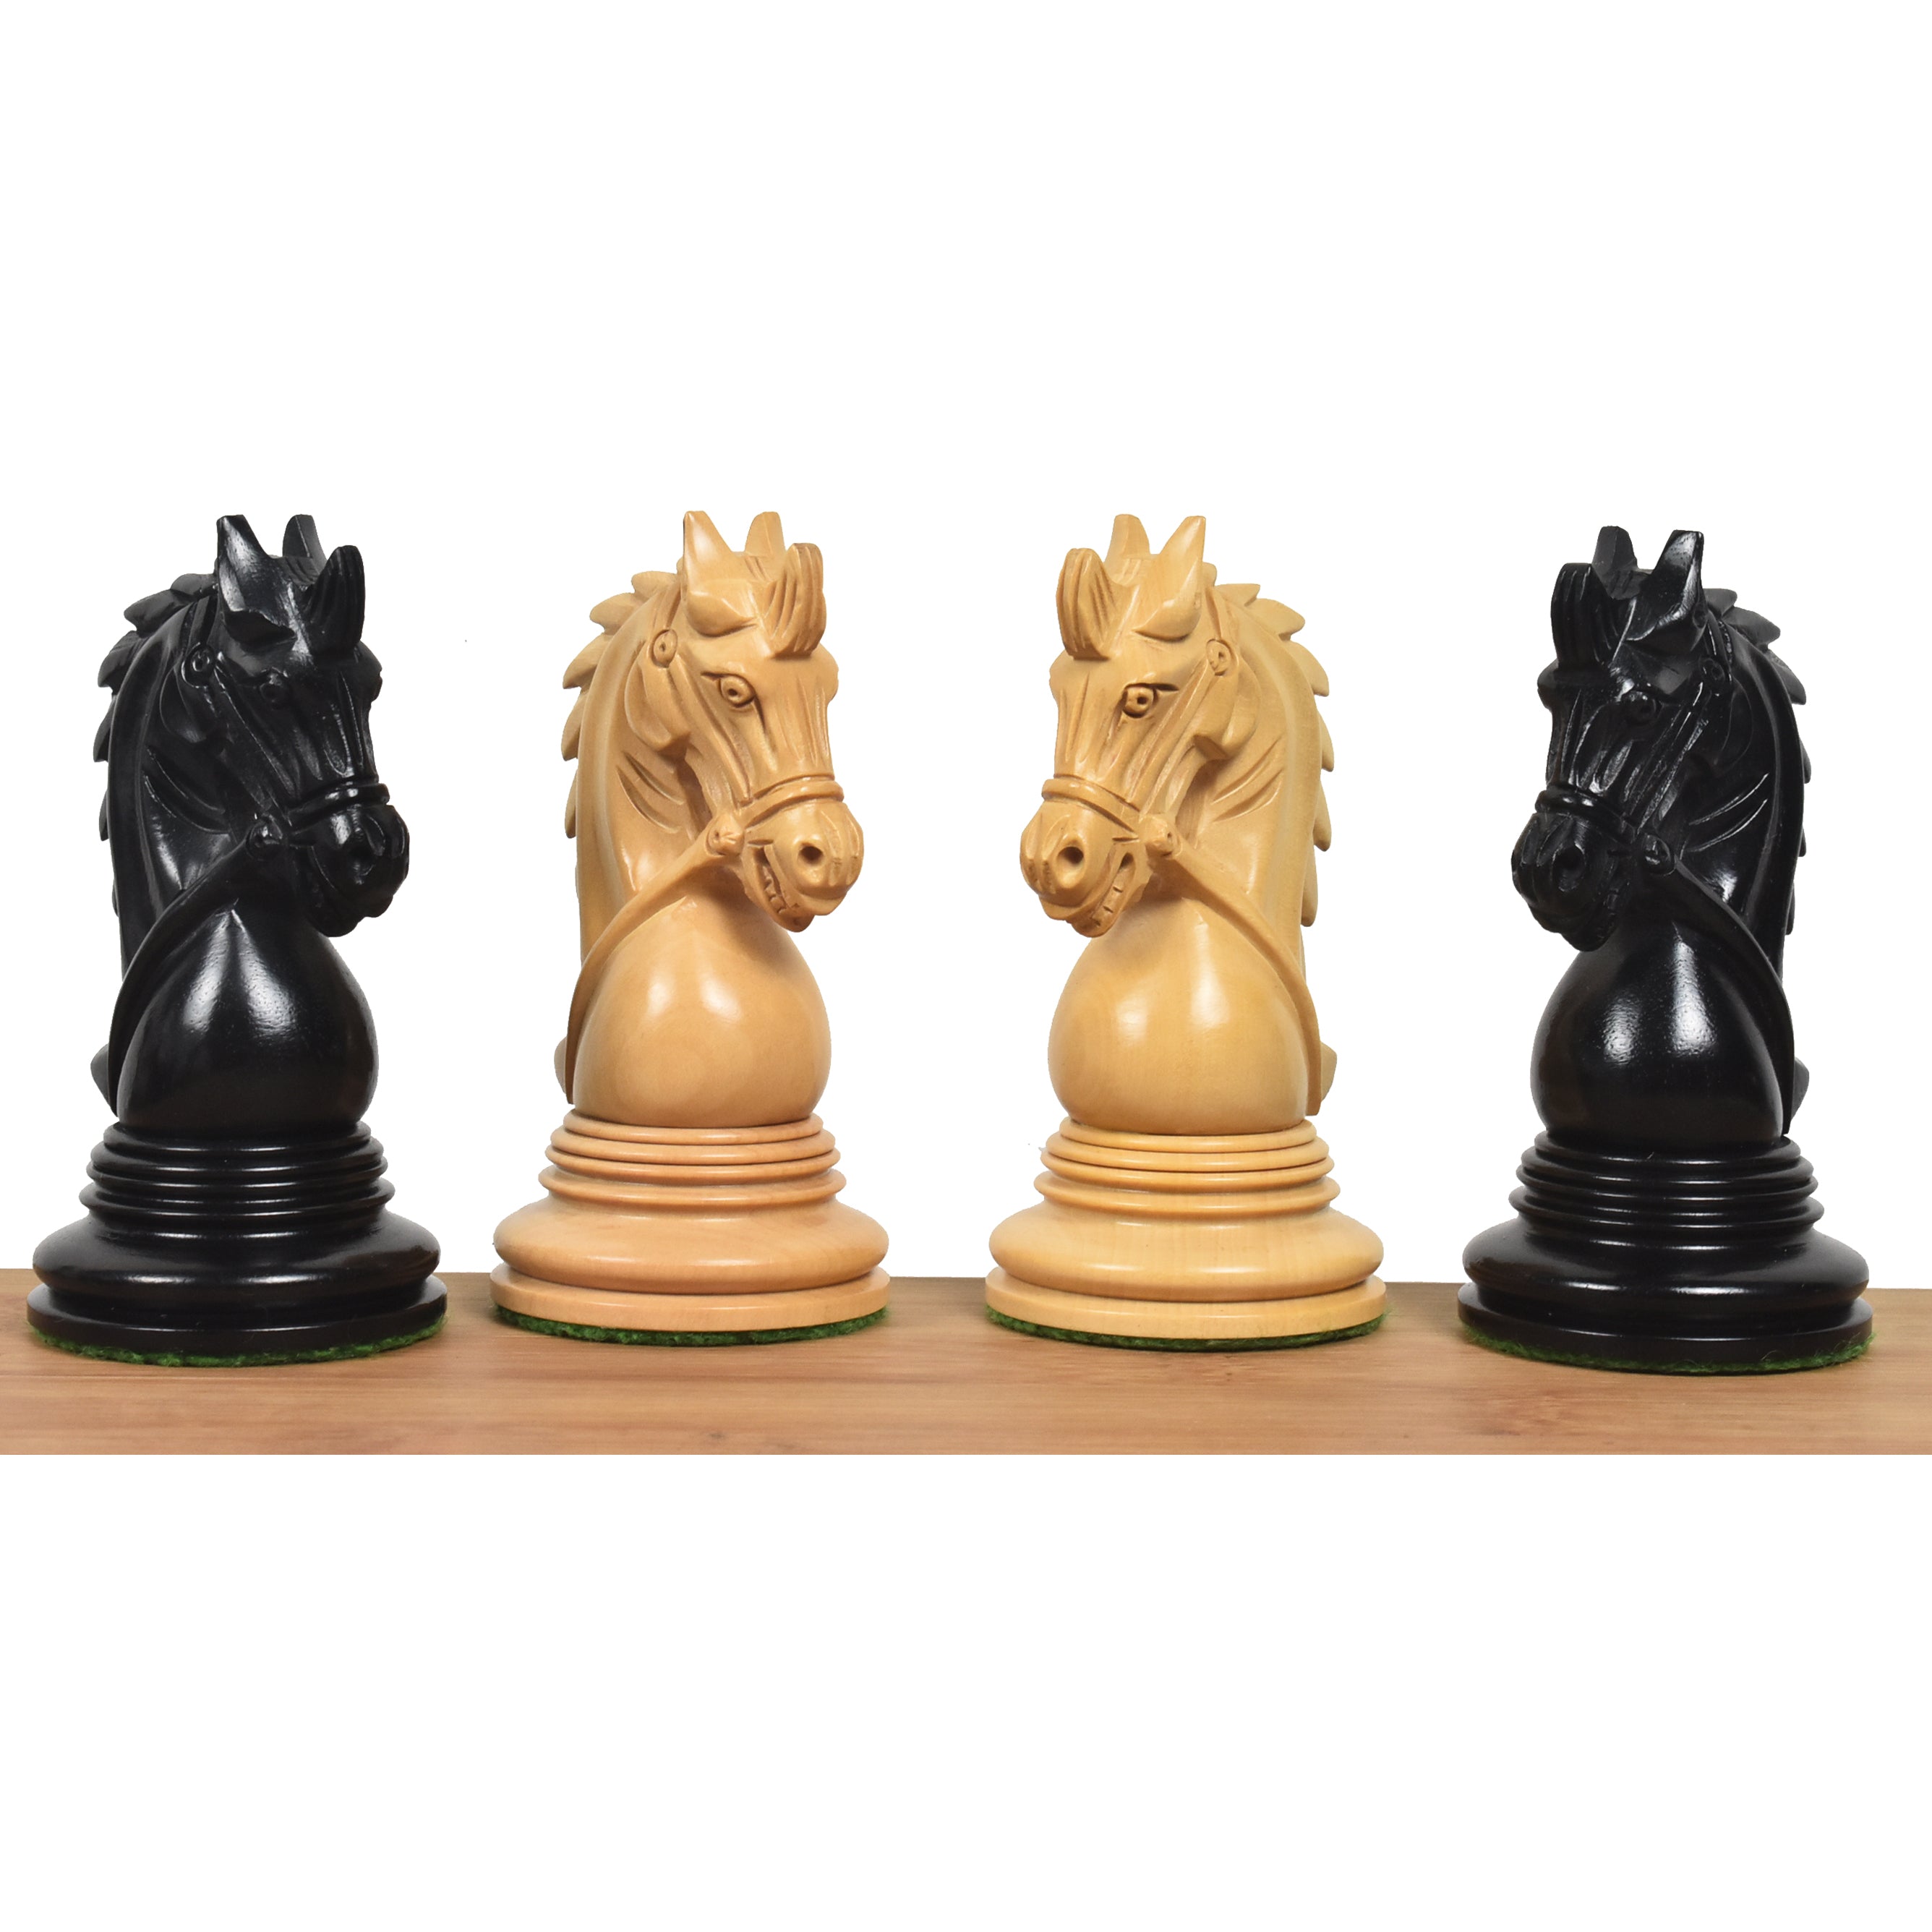 Combo of Napoleon Luxury Staunton Triple Weighted Chess Set - Pieces in Ebony Wood with 23" Large Ebony & Maple Wood Chessboard and Storage Box